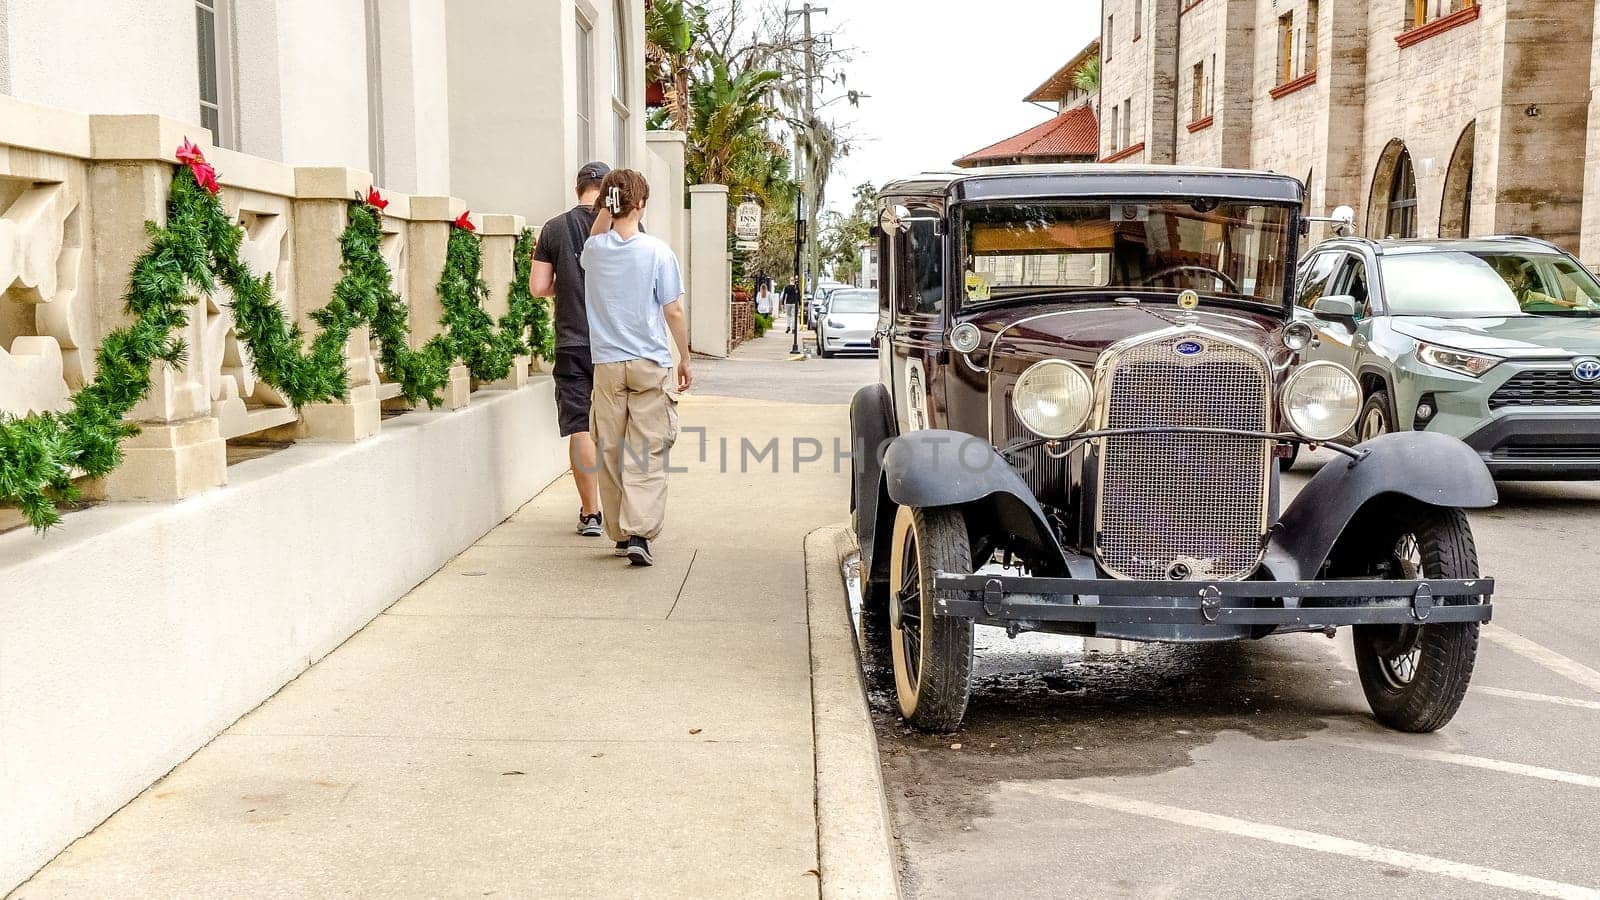 A vintage black car parked on a town road with two pedestrians walking by. The car features shiny black paint, chrome bumpers, and white wall tires, set against buildings and palm trees.